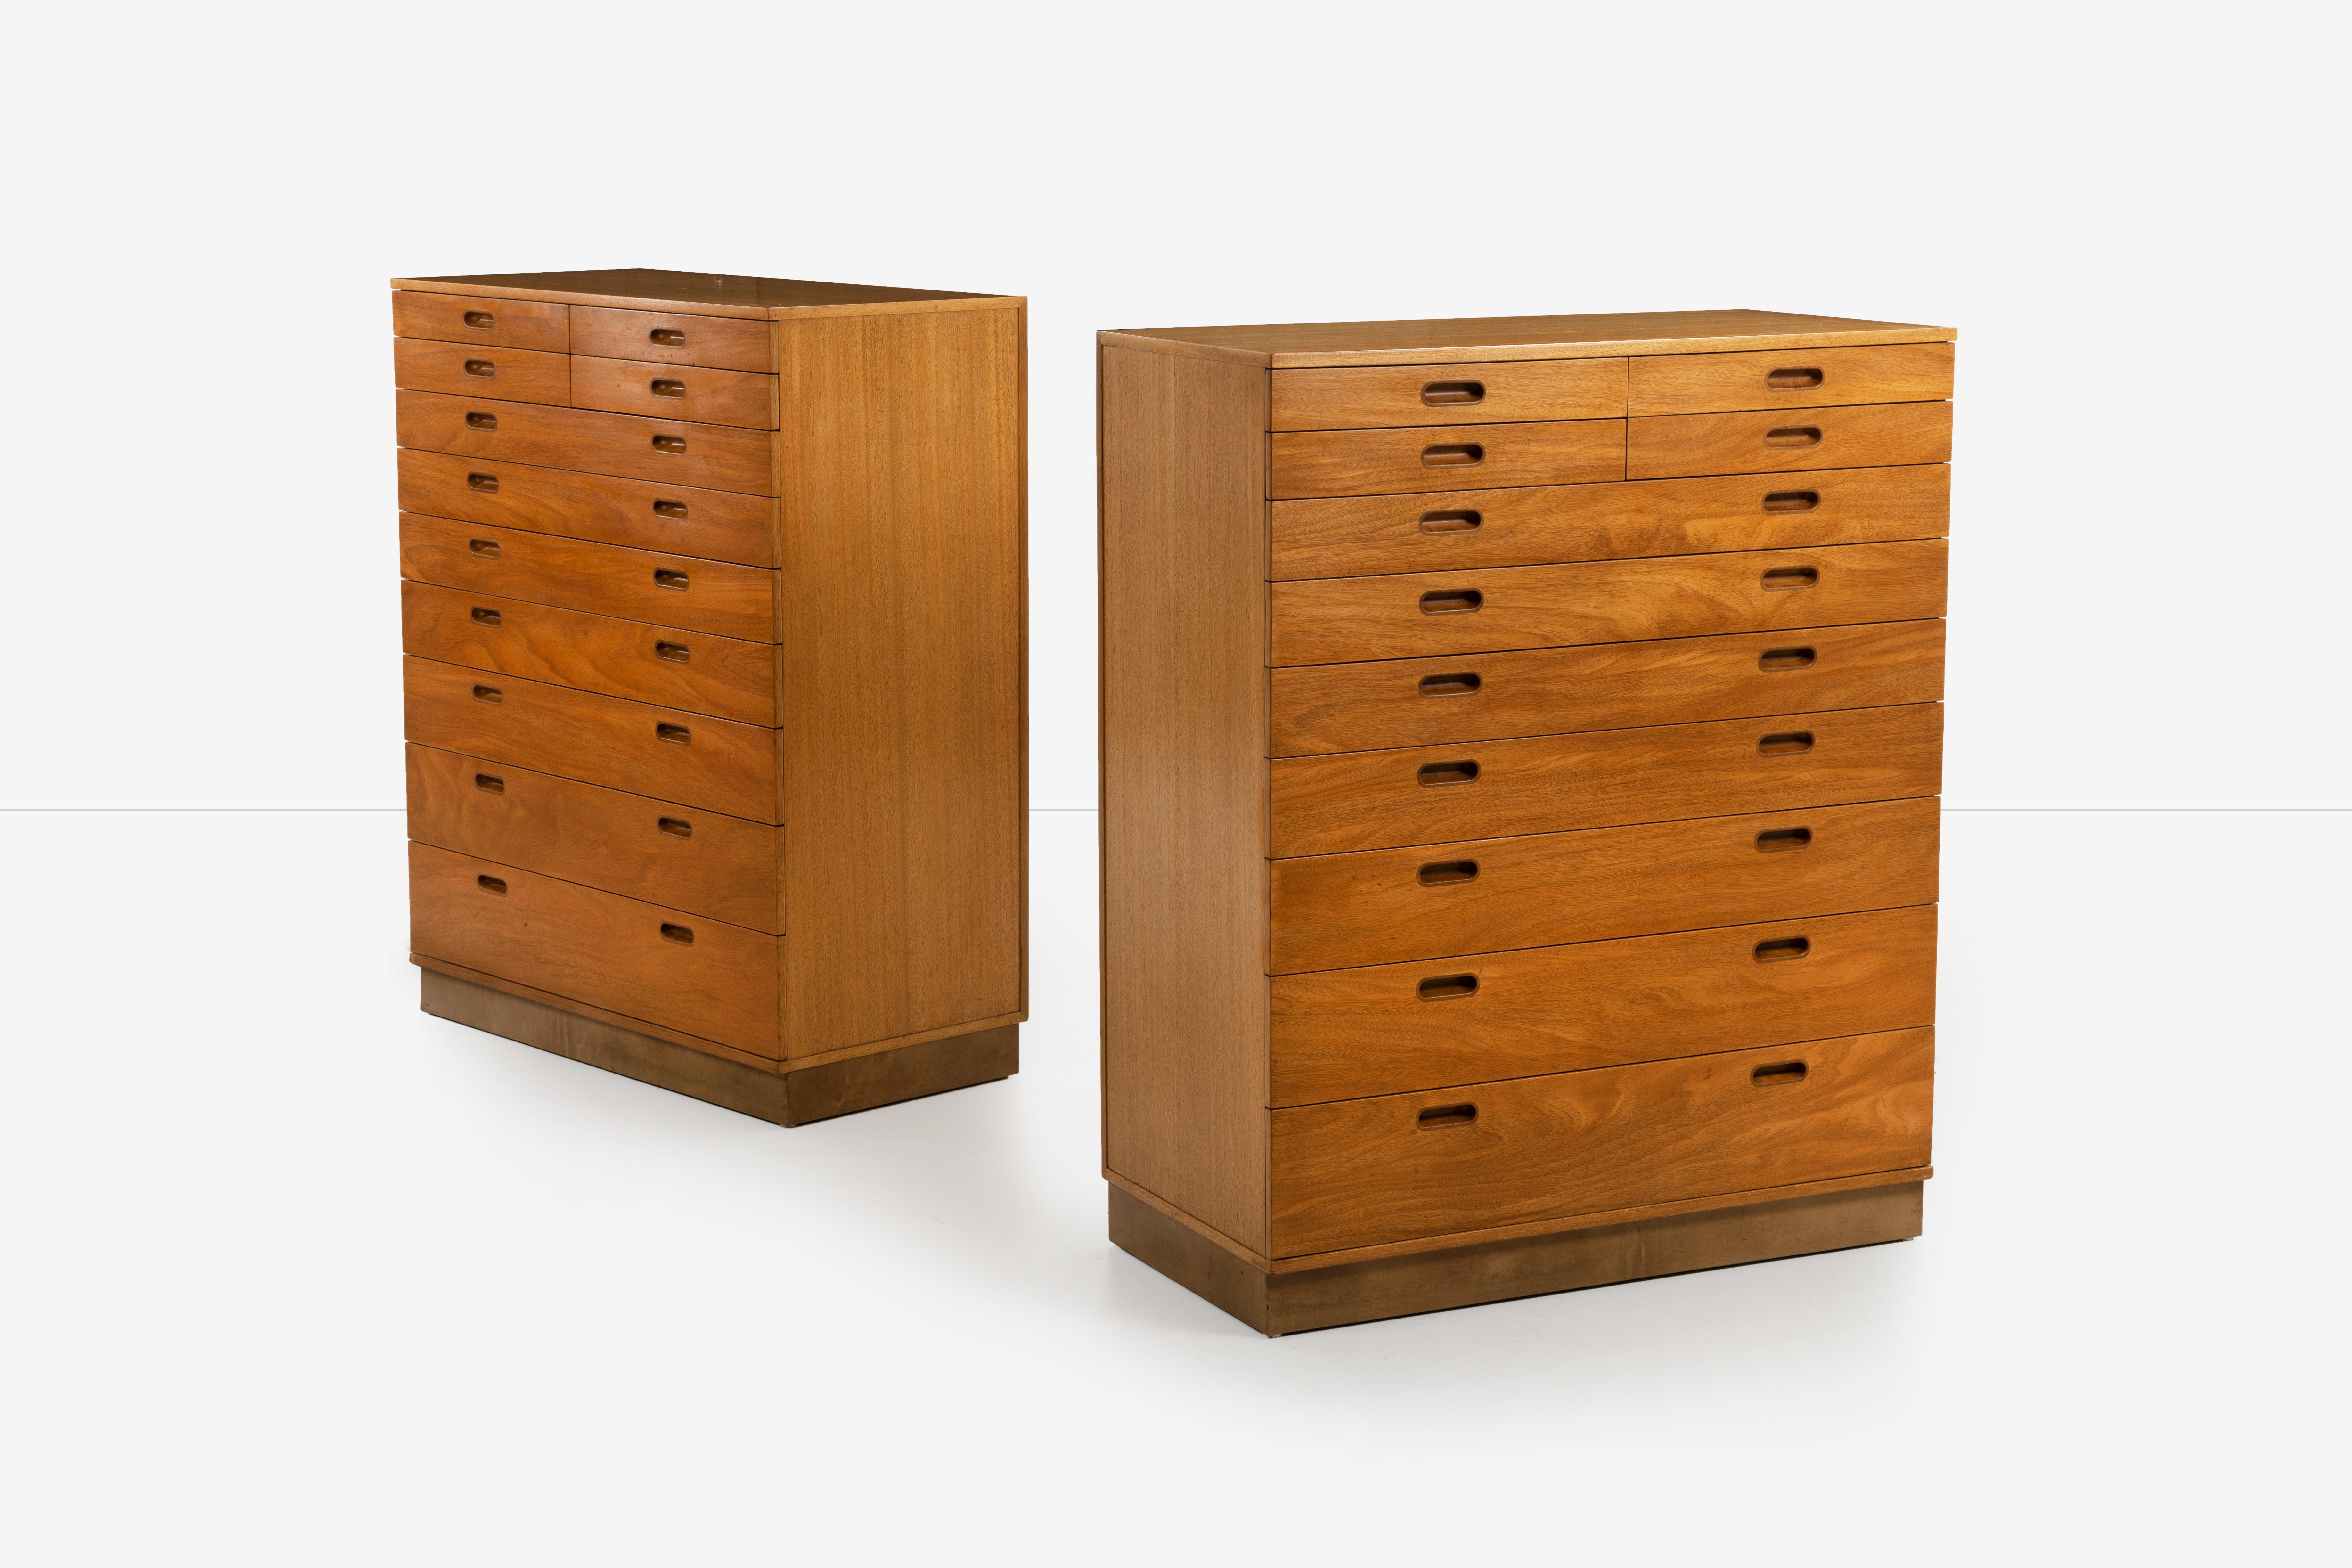 Pair of Edward Wormley for Dunbar his and hers dressers, each case has 11 drawers 22 in total.
Original mahogany-wood with cut-out finger pulls and wrapped leather plinth bases. Some drawers have removable dividers. All drawers in fine working